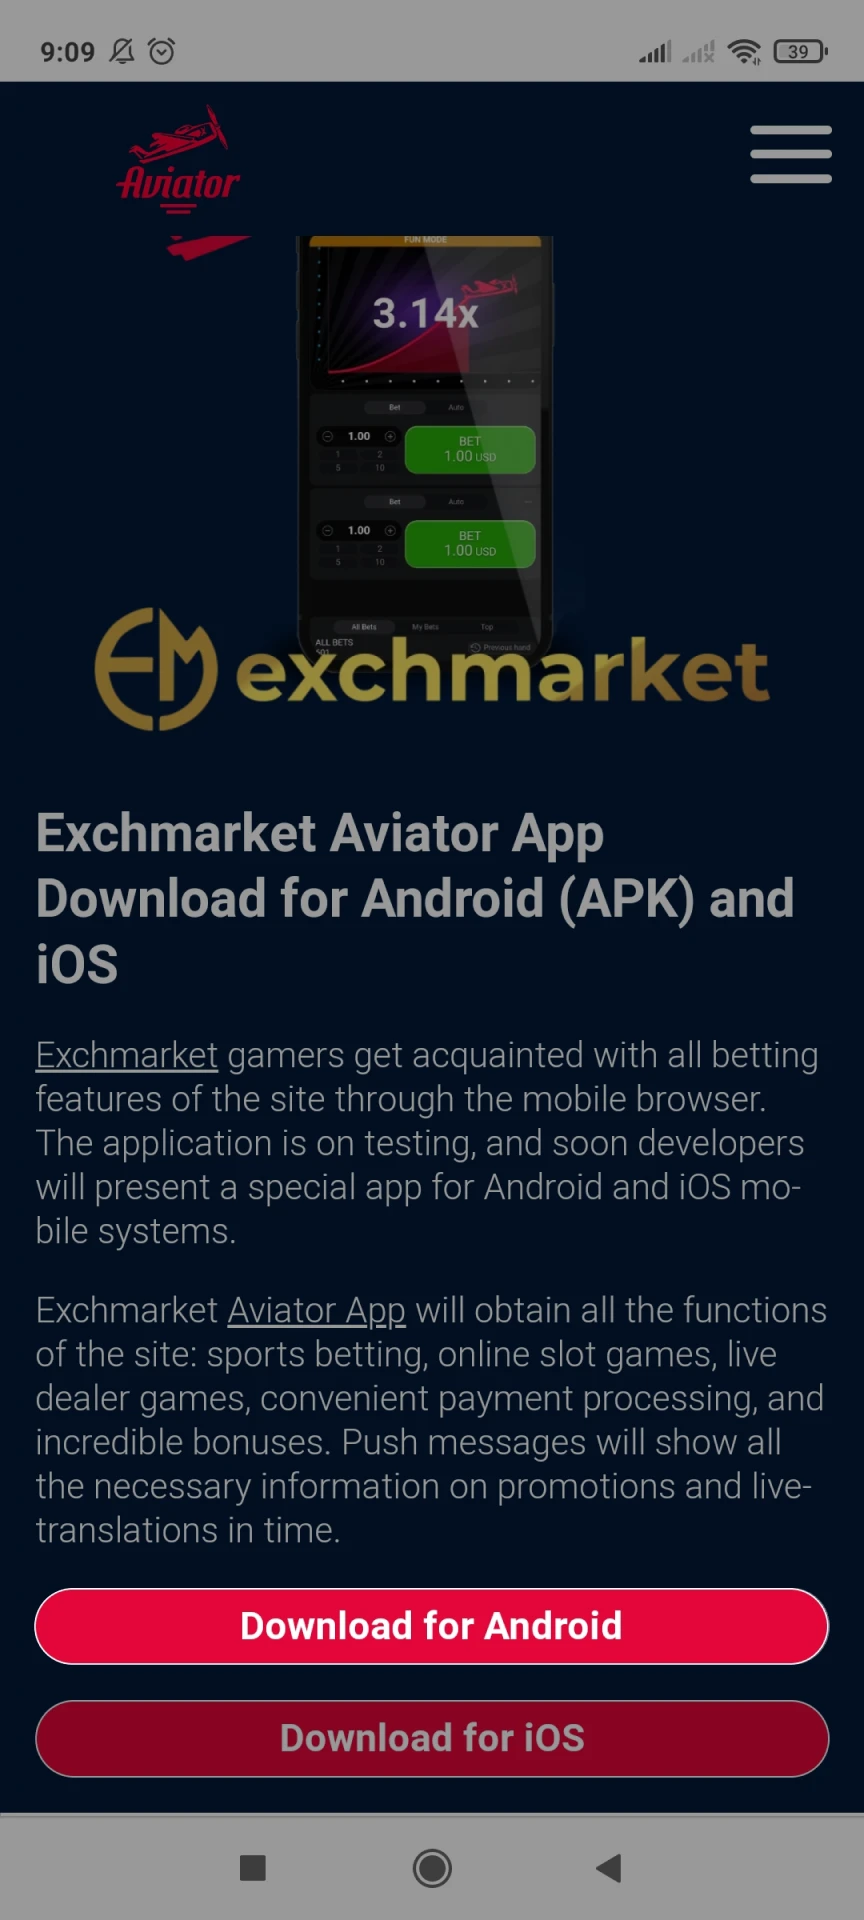 Go to the Exchmarket download page for Android.